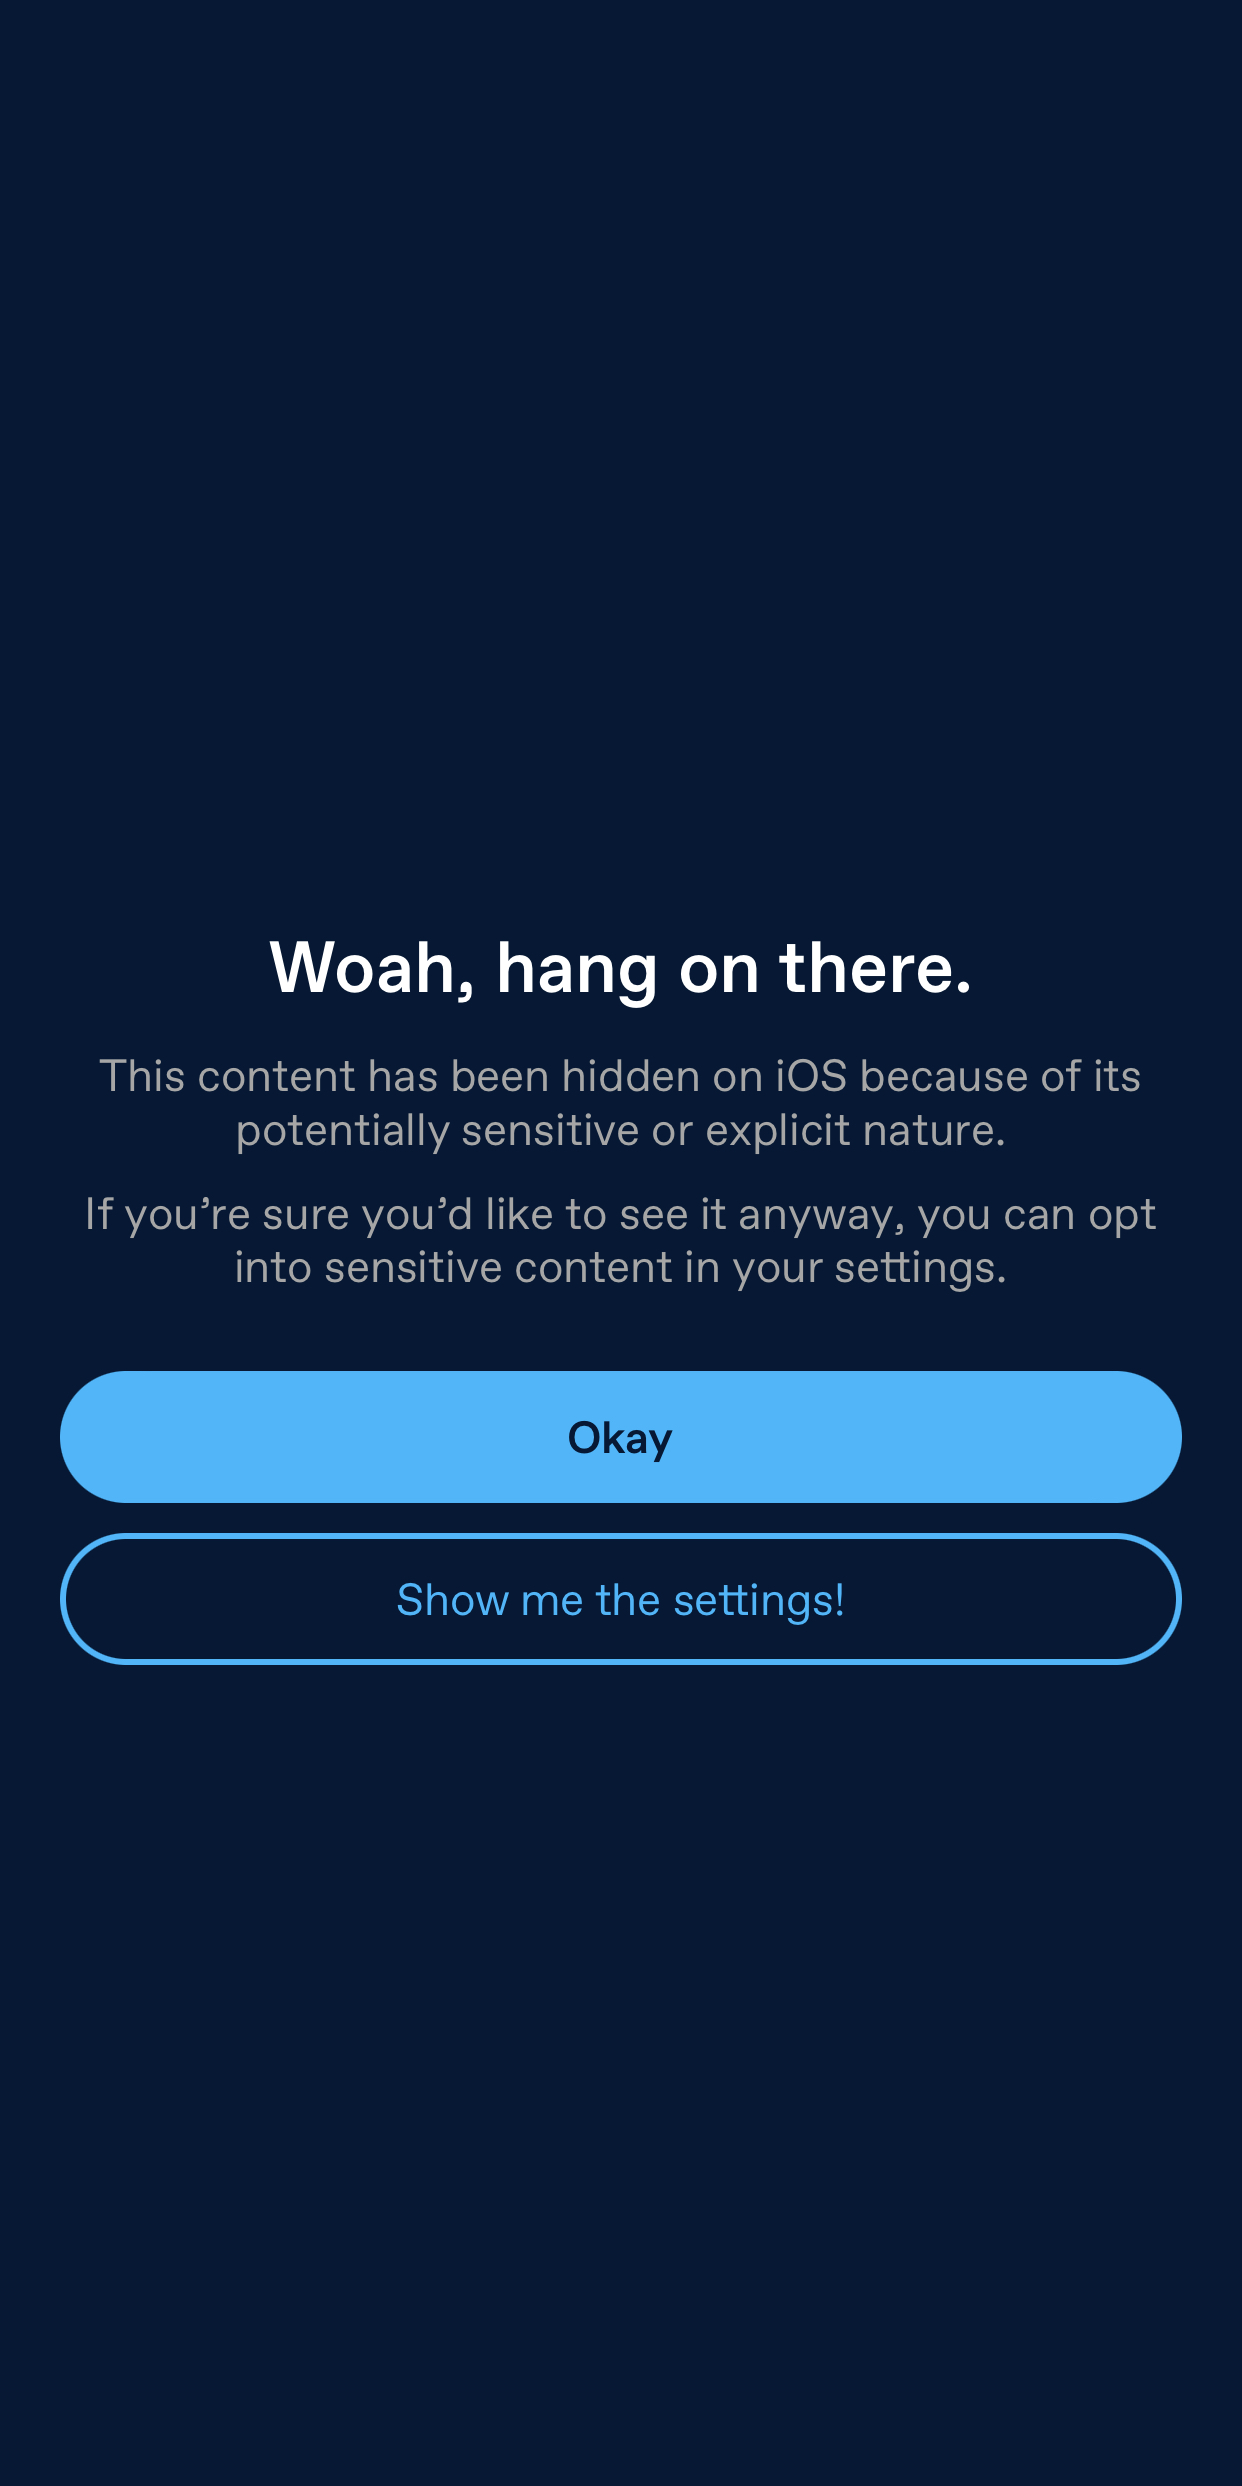 An overlay in the iOS app. The text reads: Woah, hang on there. This content has been hidden on iOS because of its potentially sensitive or explicit nature. If you're sure you'd like to see it anyway, you can opt into sensitive content in your settings. Two buttons below read: Okay and Show me the settings!